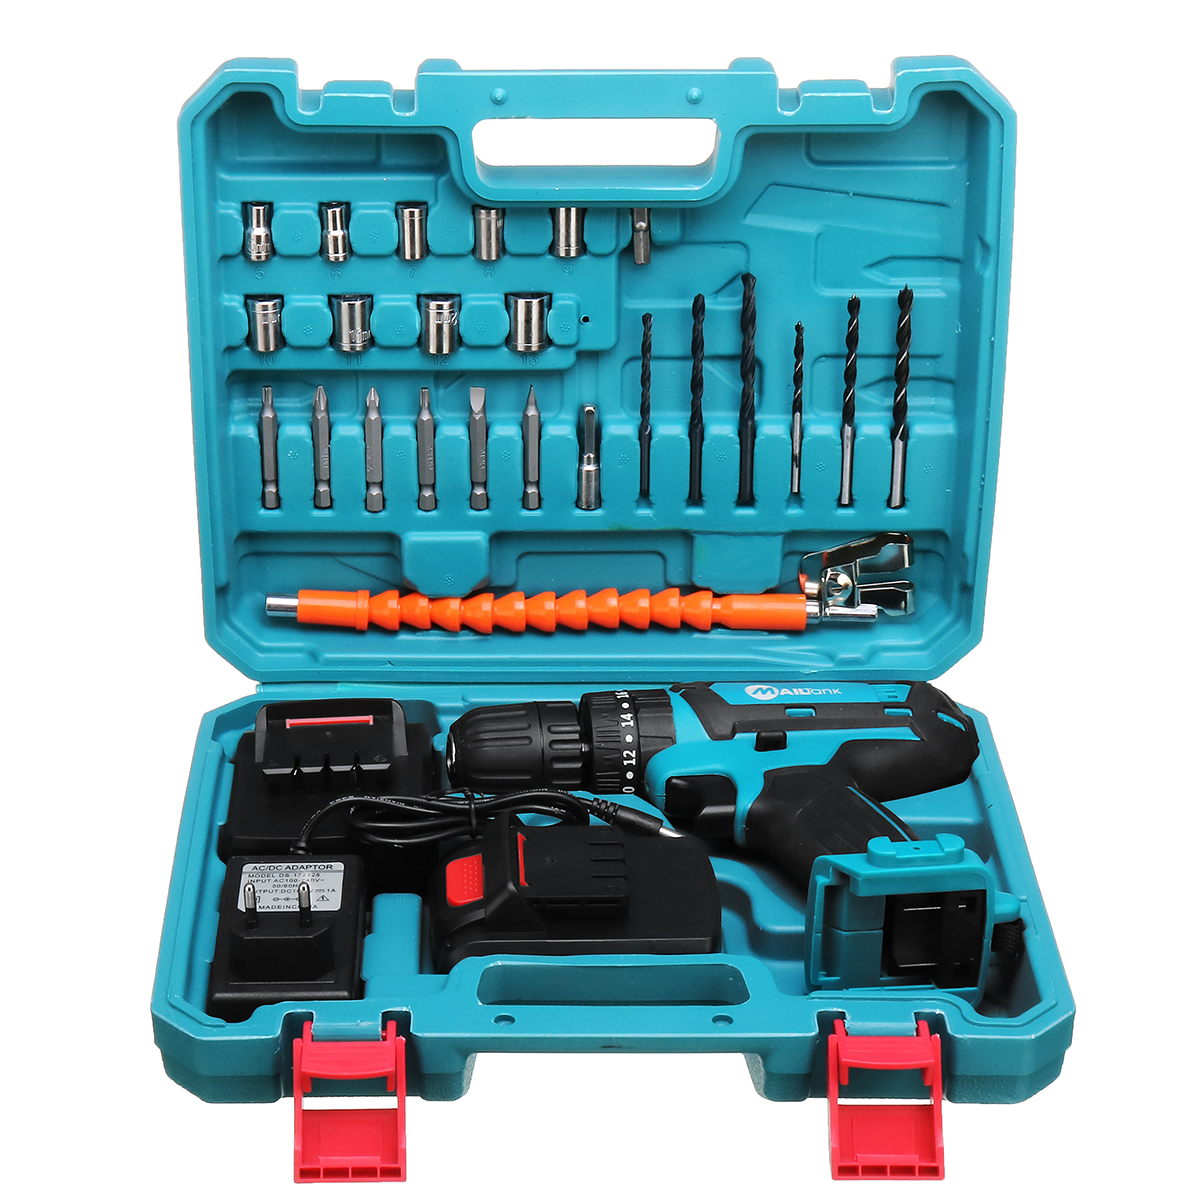 32V 2 Speed Power Drills 6000mah Cordless Drill 3 IN1 Electric Screwdriver Hammer Hand Drill 2 Batteries 25